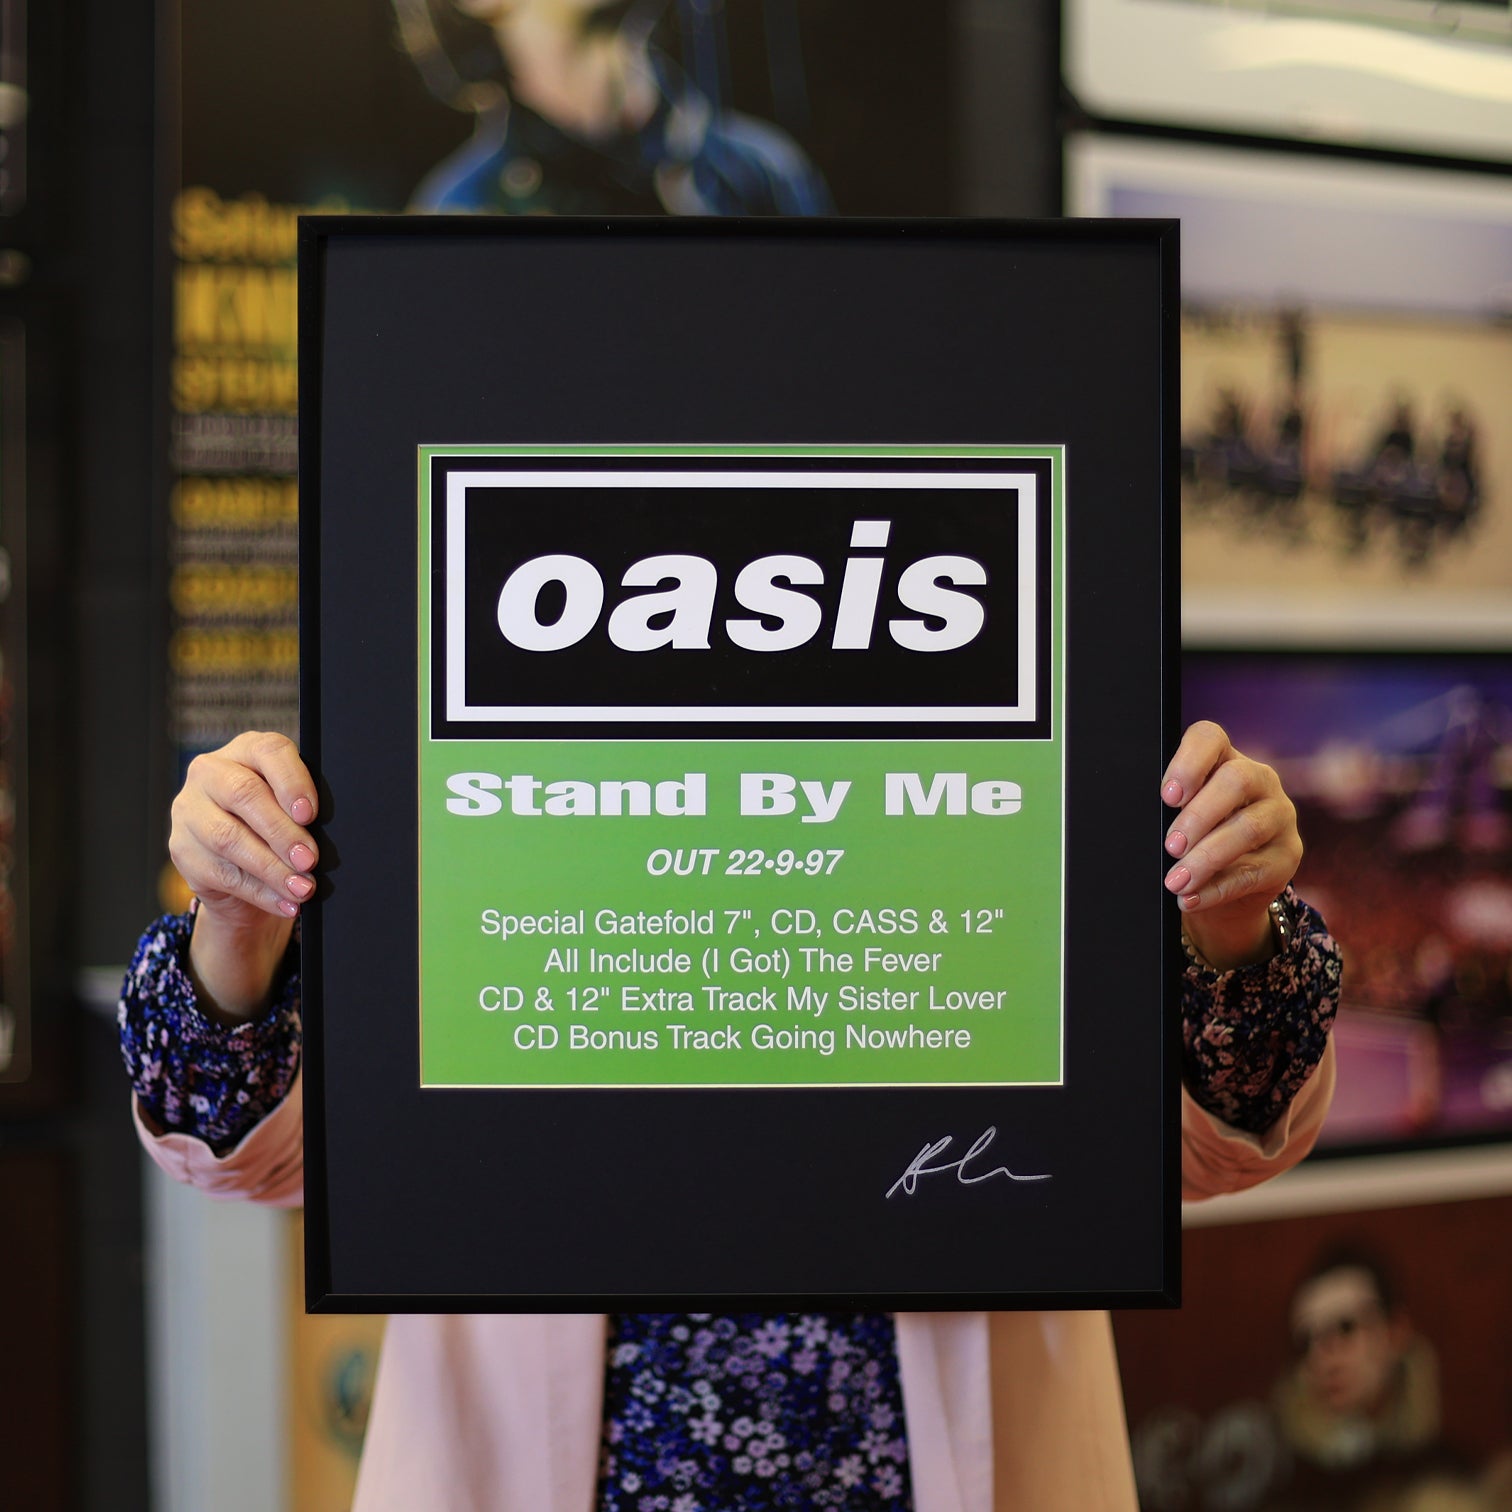 Oasis - Stand By Me - Original Creation Records Dealer Poster - New Item